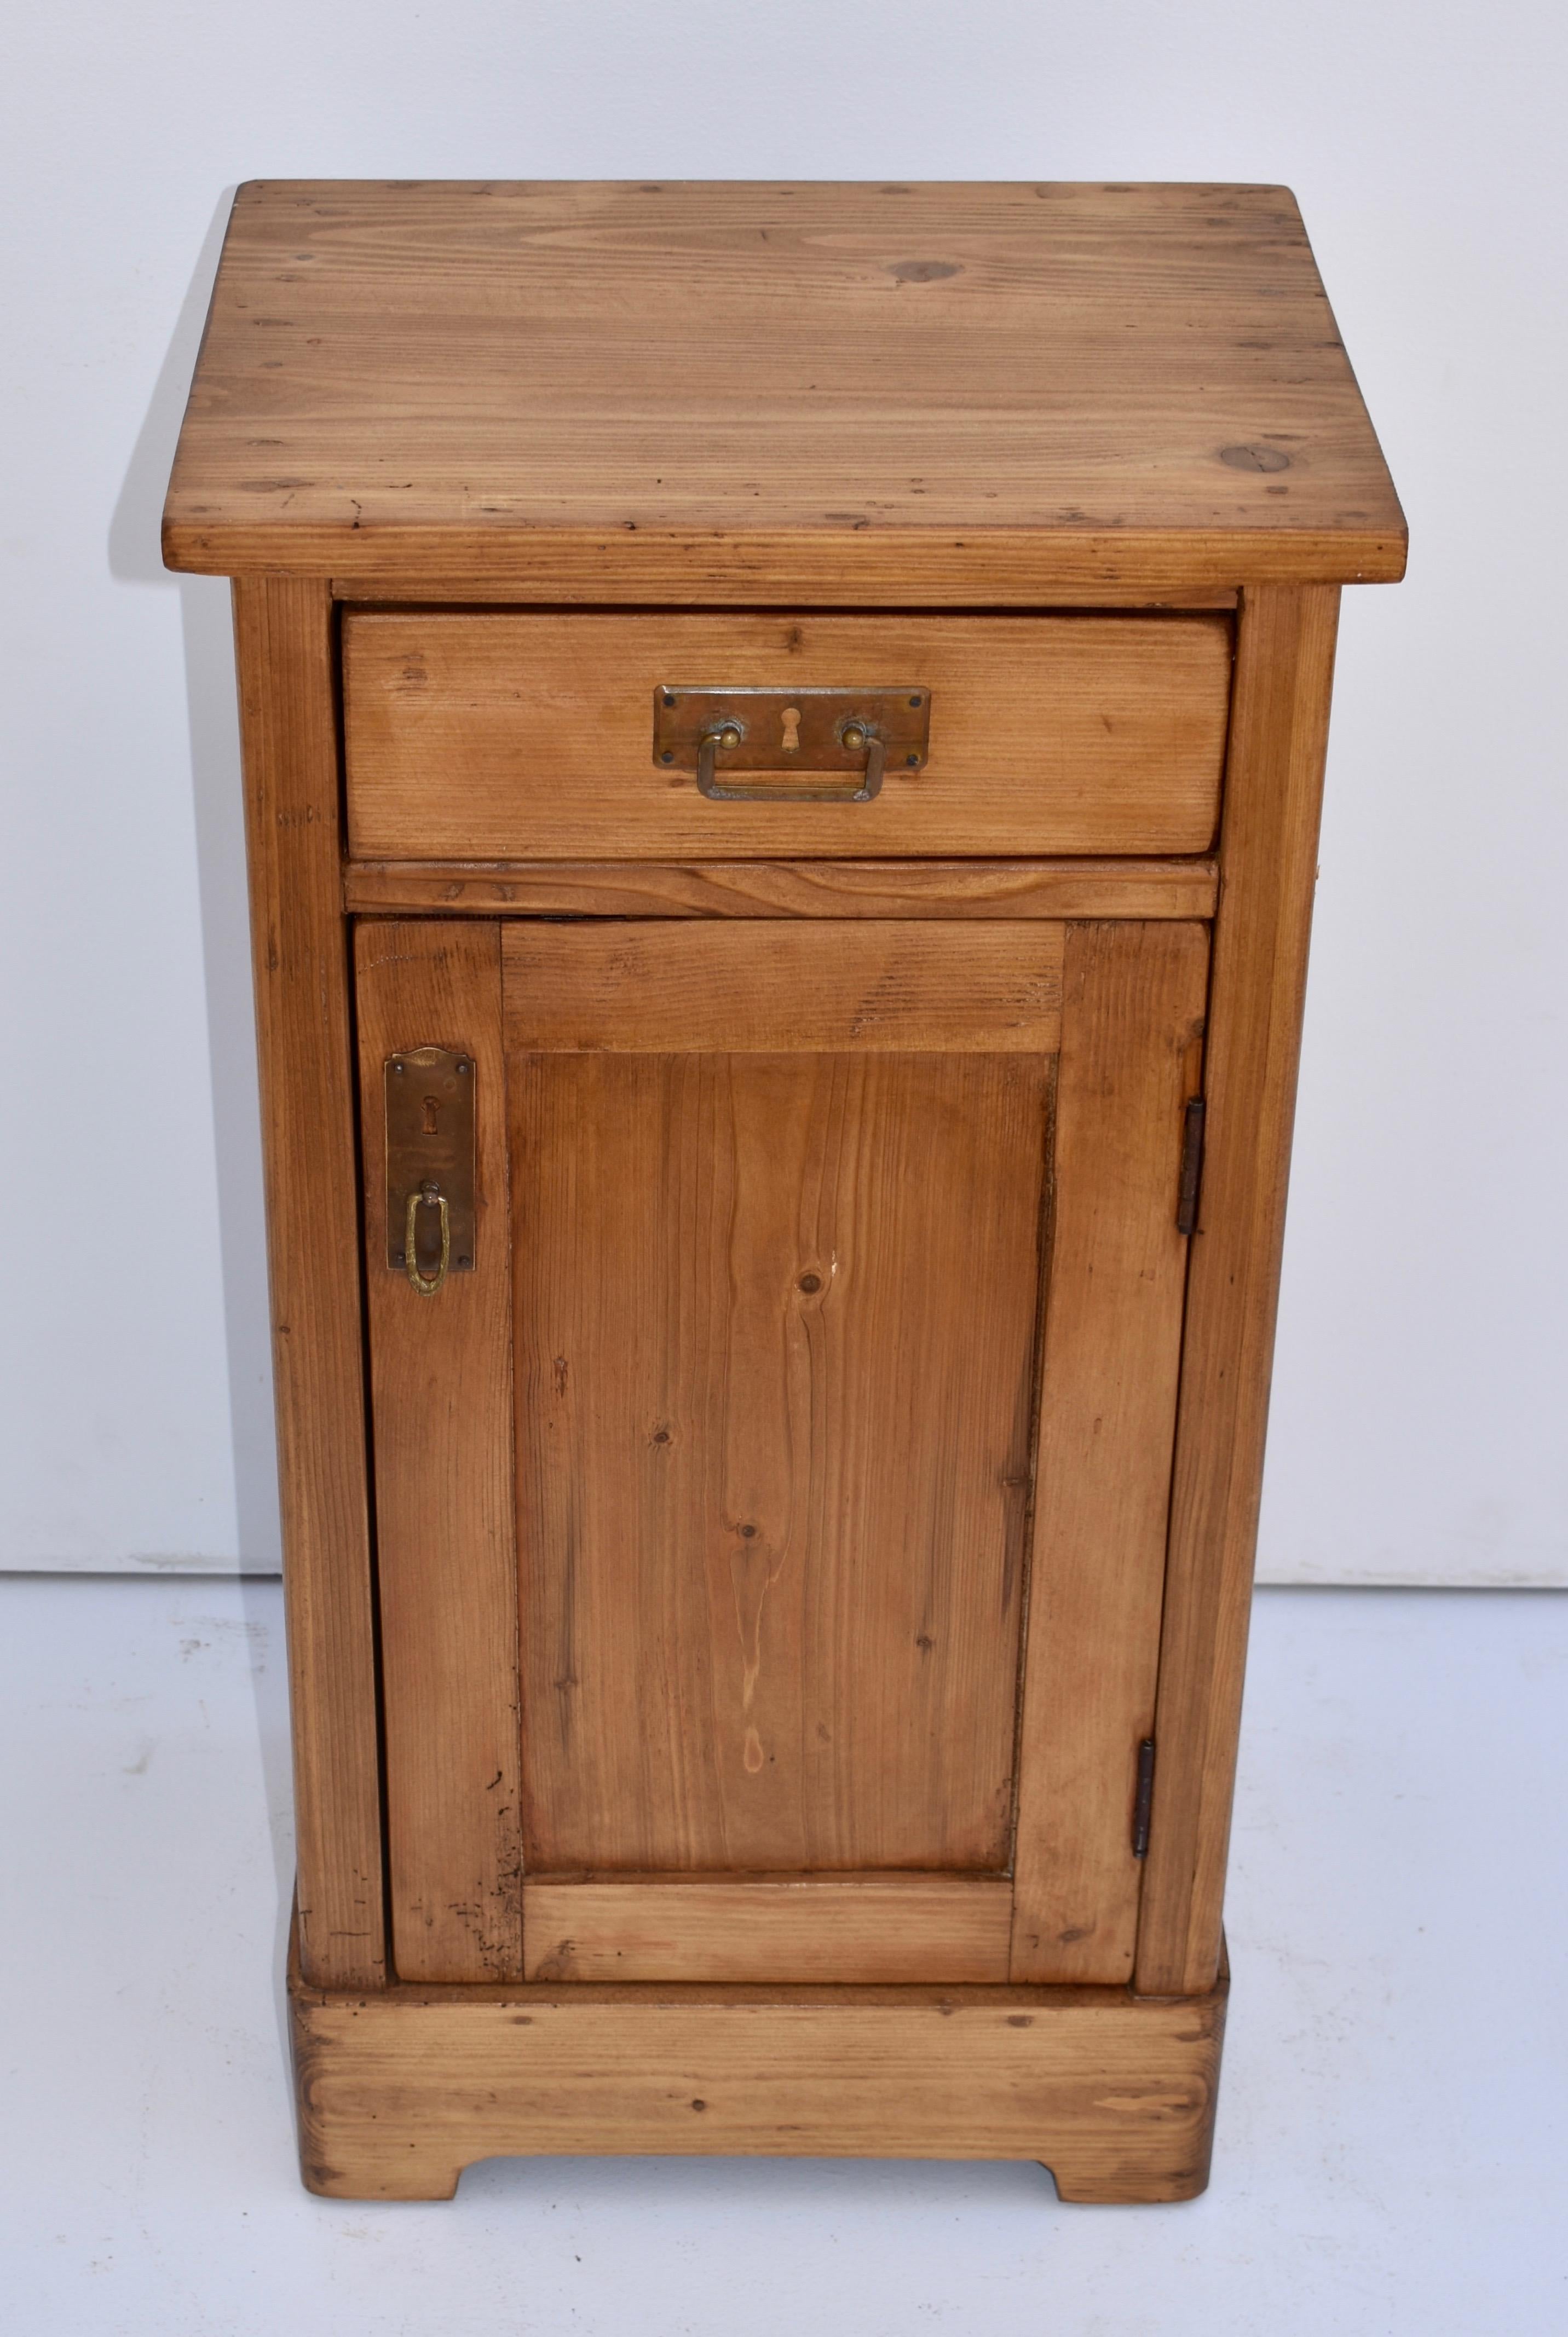 This heavy and very well-built pine nightstand has one handcut dovetailed drawer and one paneled door with a single shelf inside.